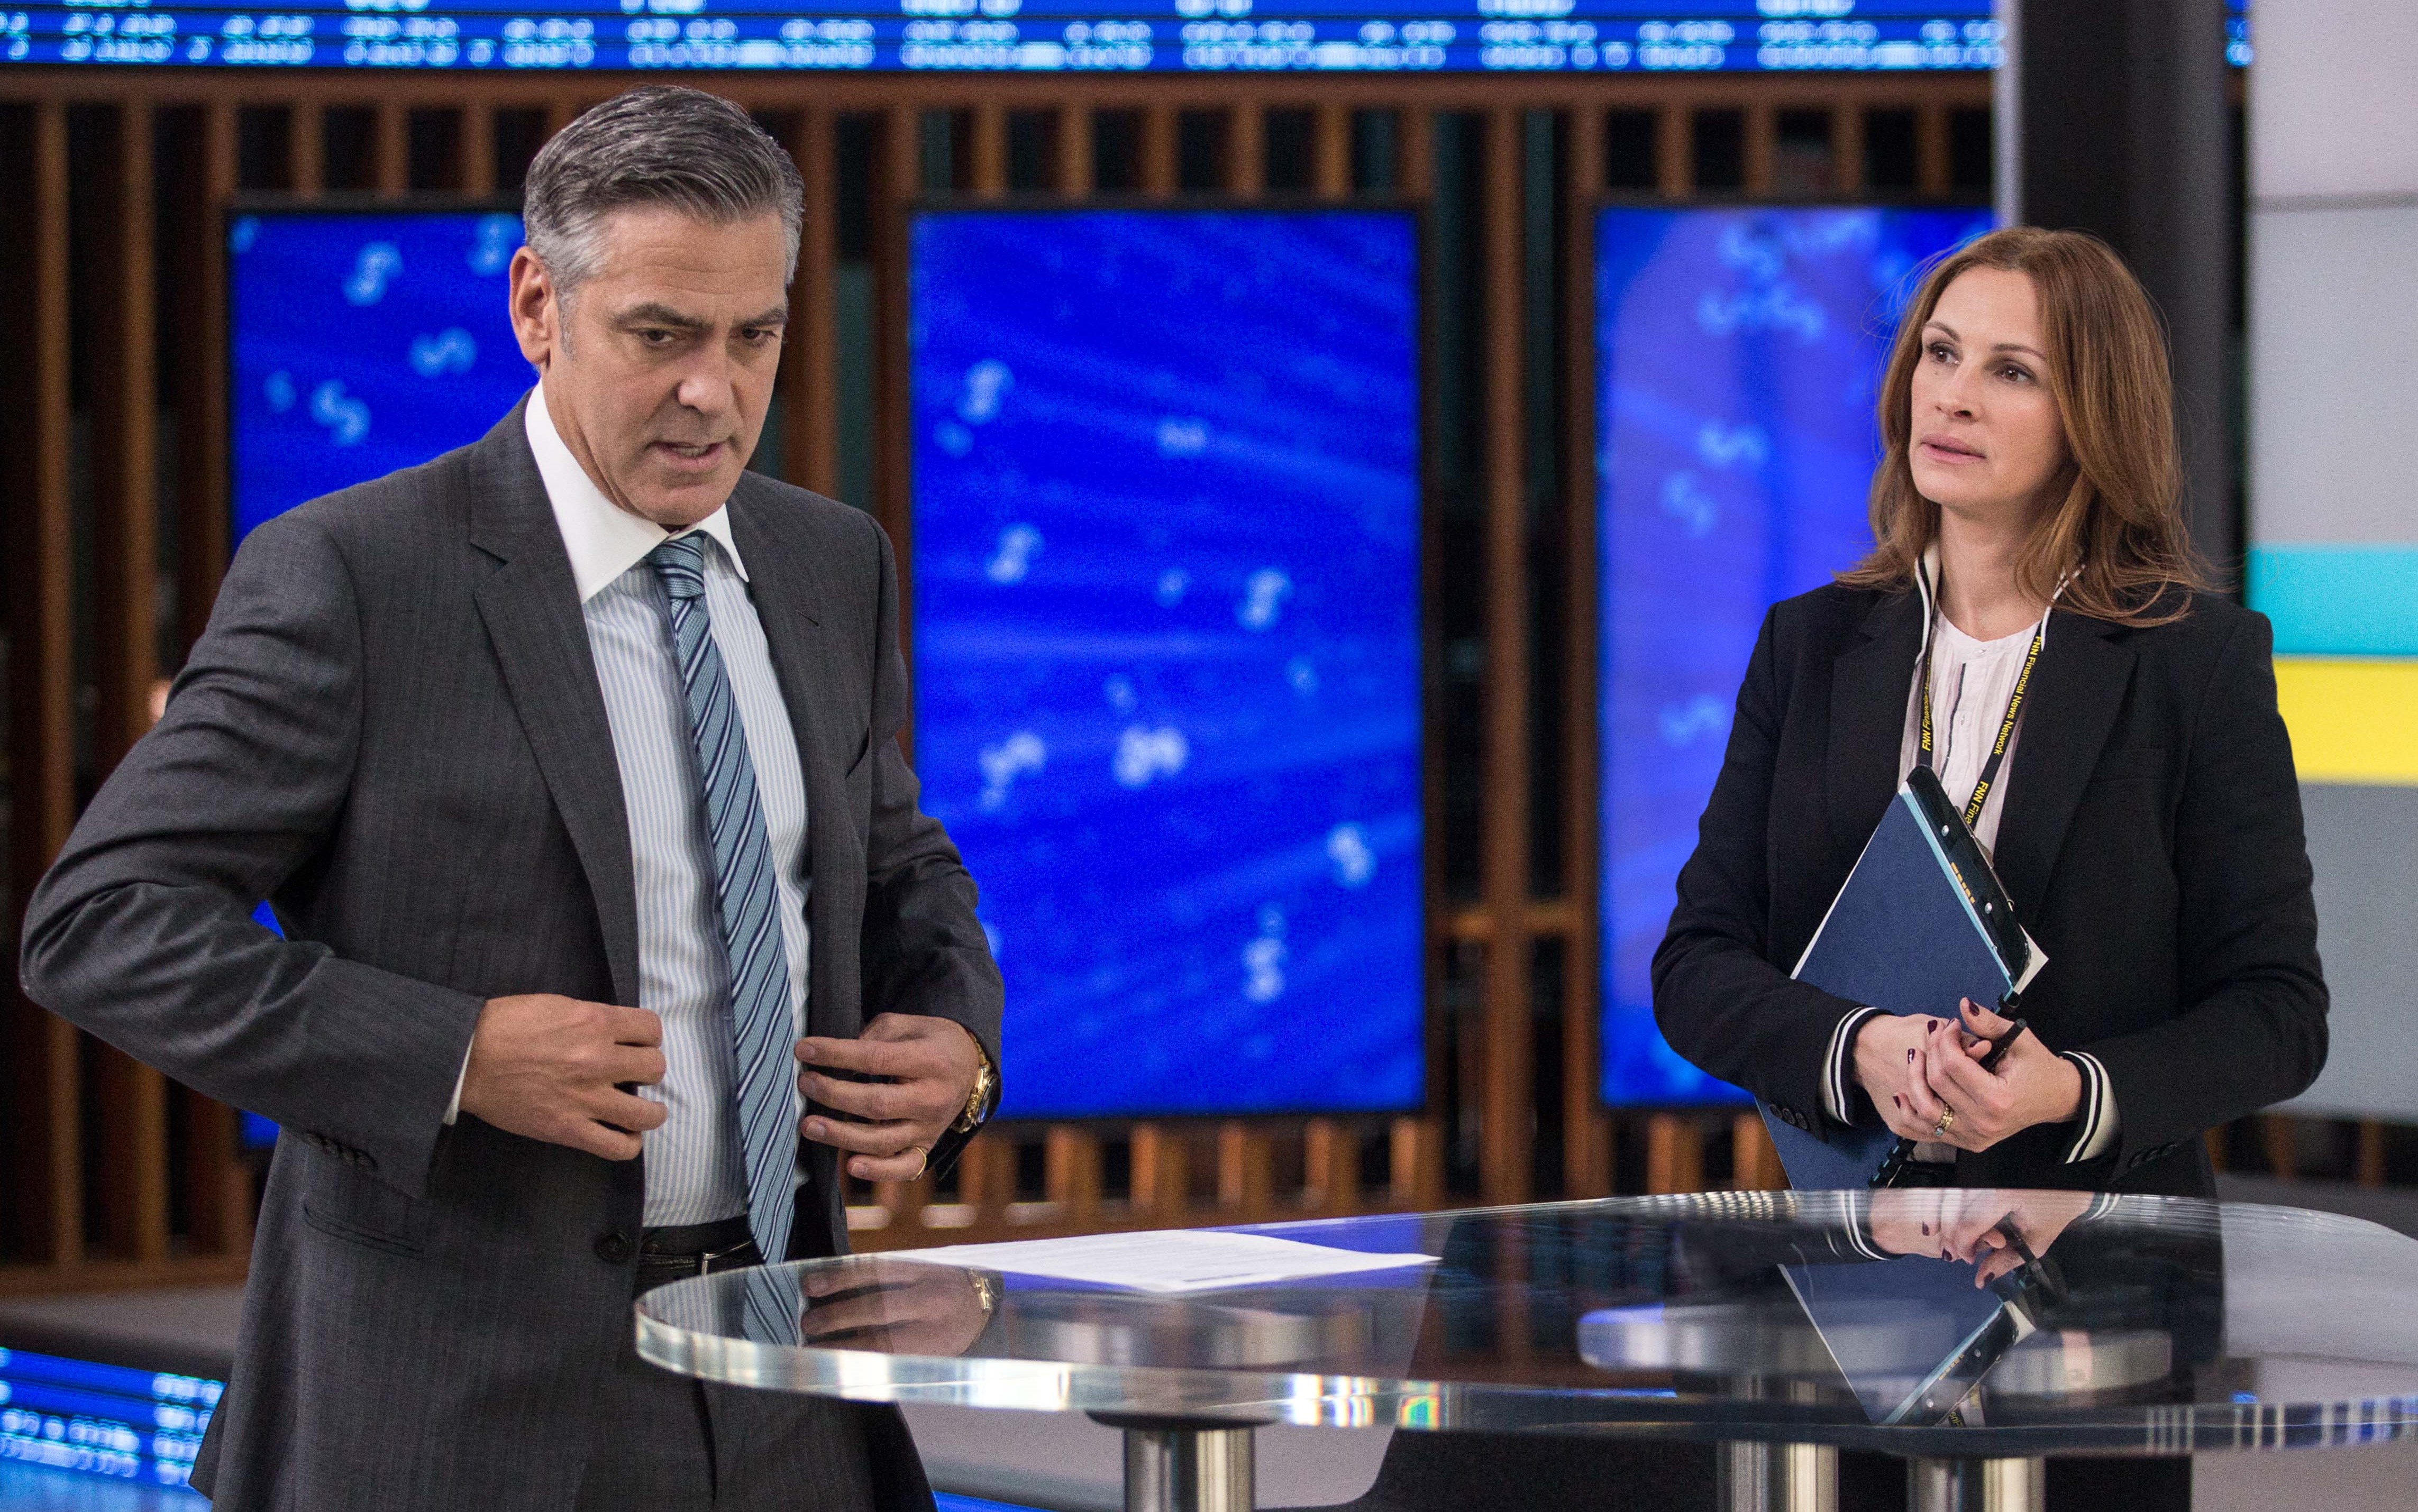 Julia Roberts and George Clooney have a pre-show chat before the taping of Clooney's show 'Money Monster.'